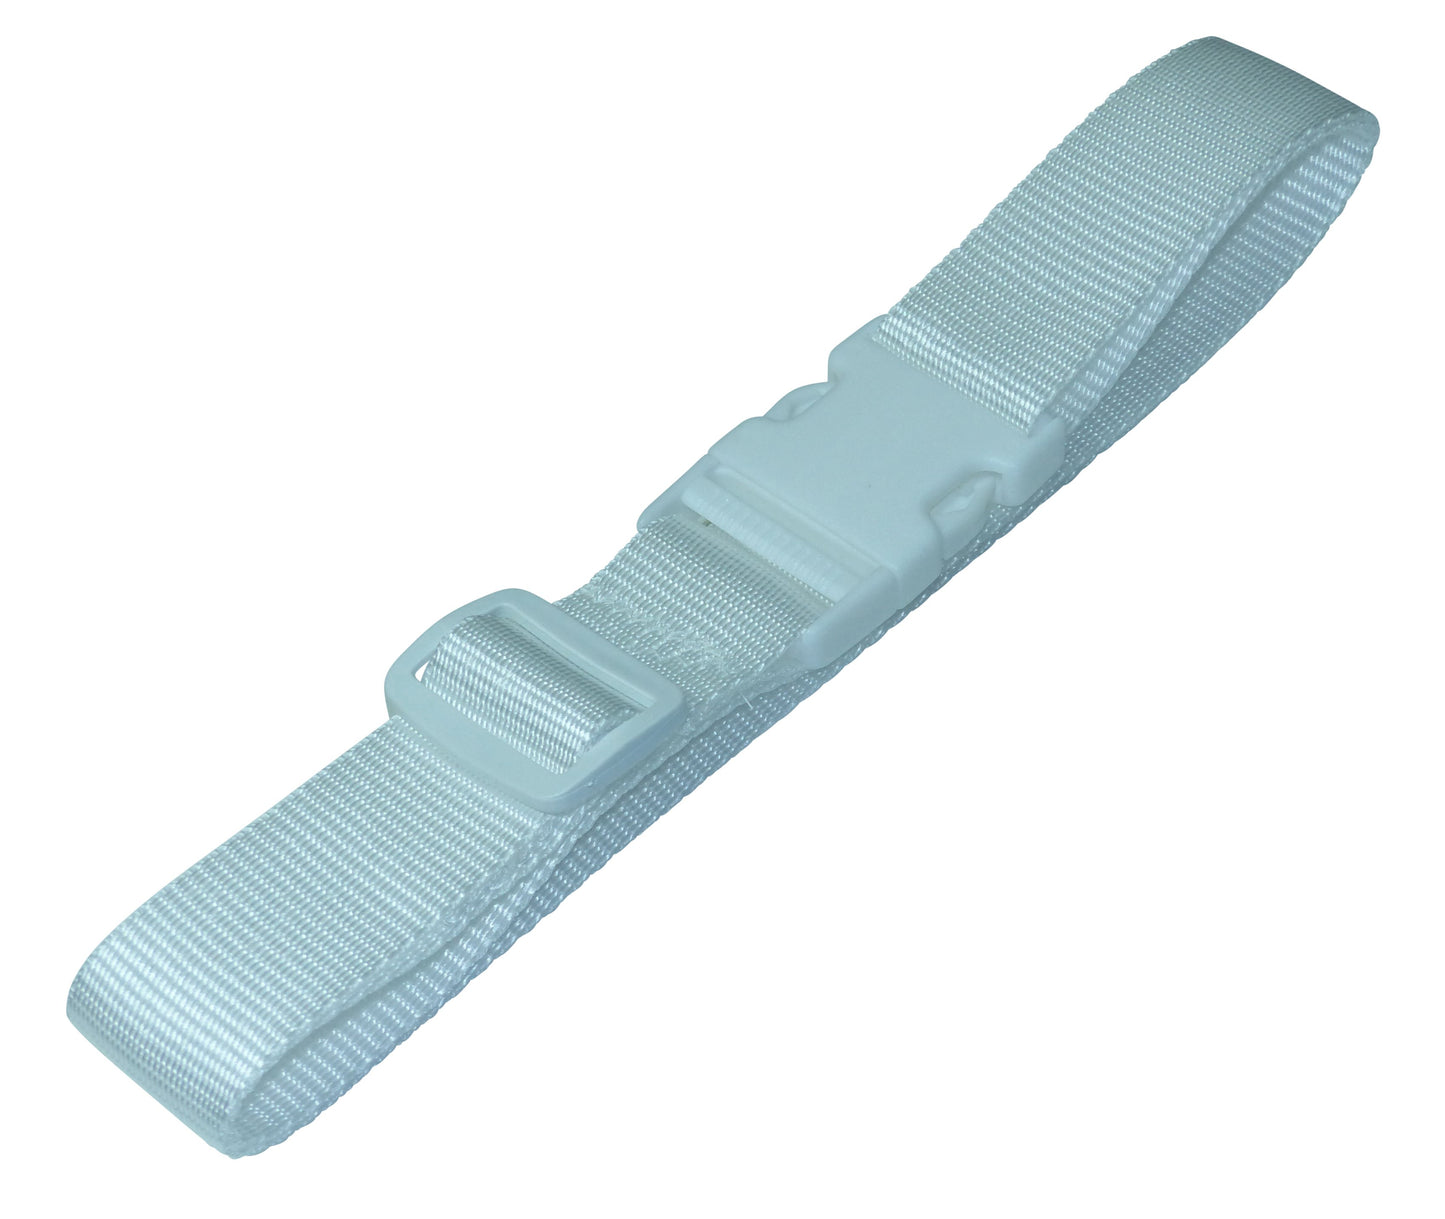 Benristraps 38mm Webbing Strap with Quick Release & Length-Adjusting Buckles in white